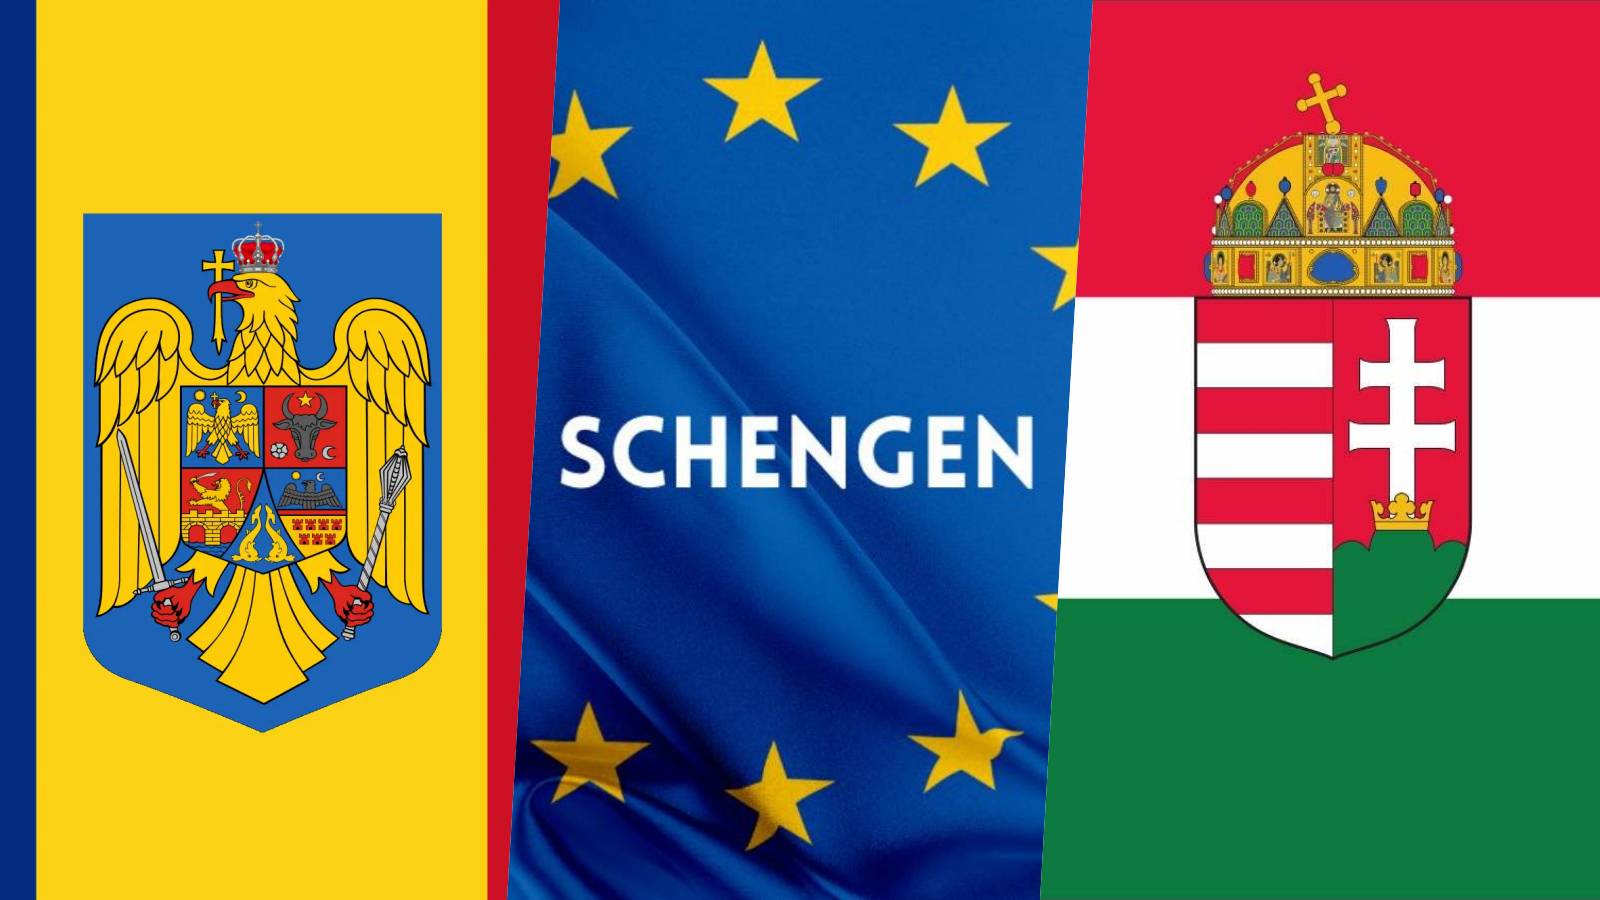 Hungary Official Announcements LAST MINUTE Measures Completion of Romania's Schengen Accession